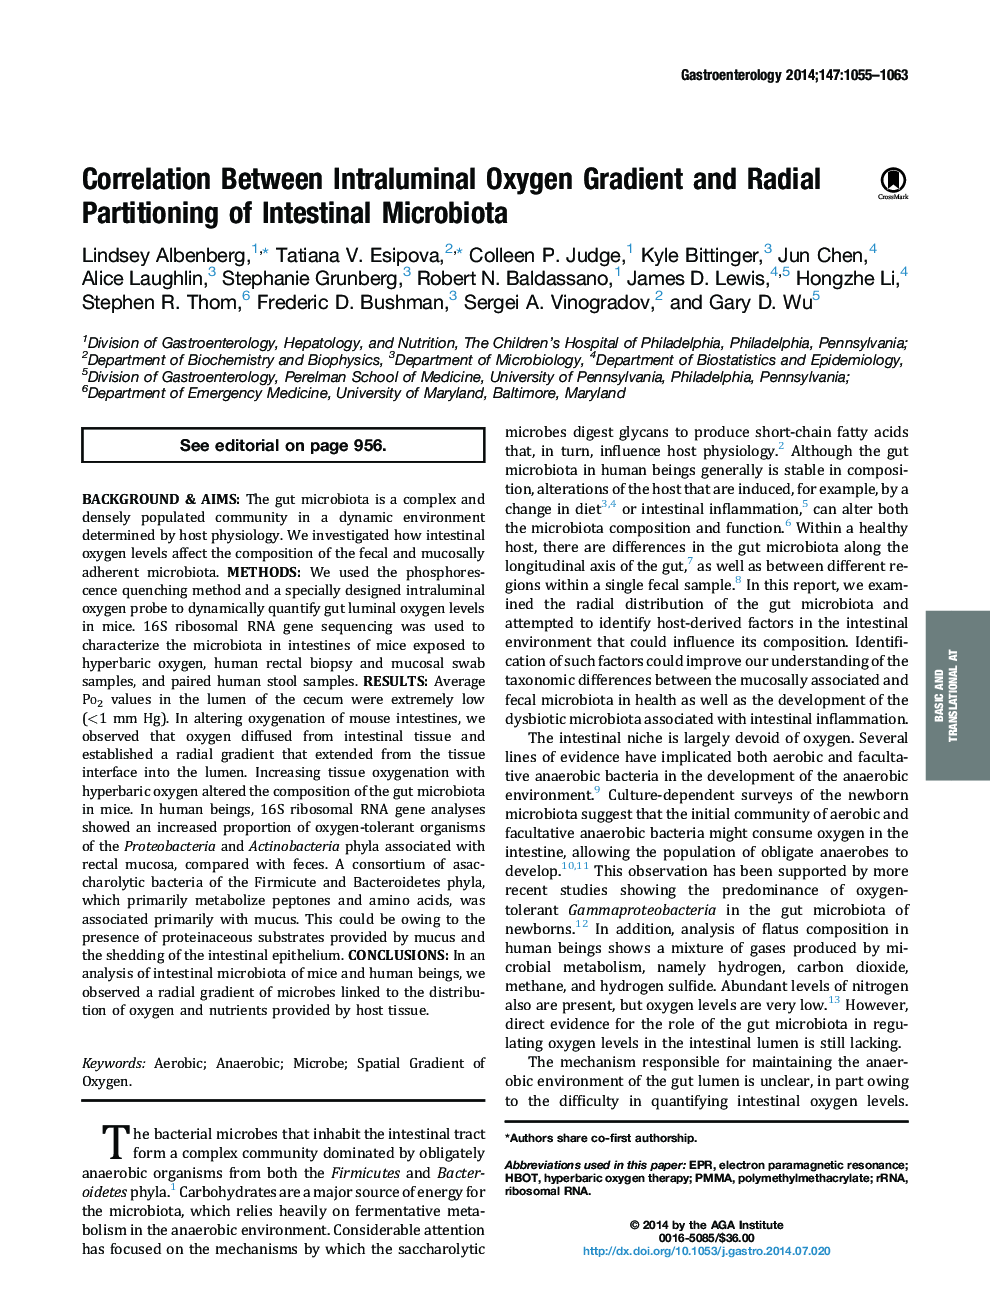 Correlation Between Intraluminal Oxygen Gradient and Radial Partitioning of Intestinal Microbiota